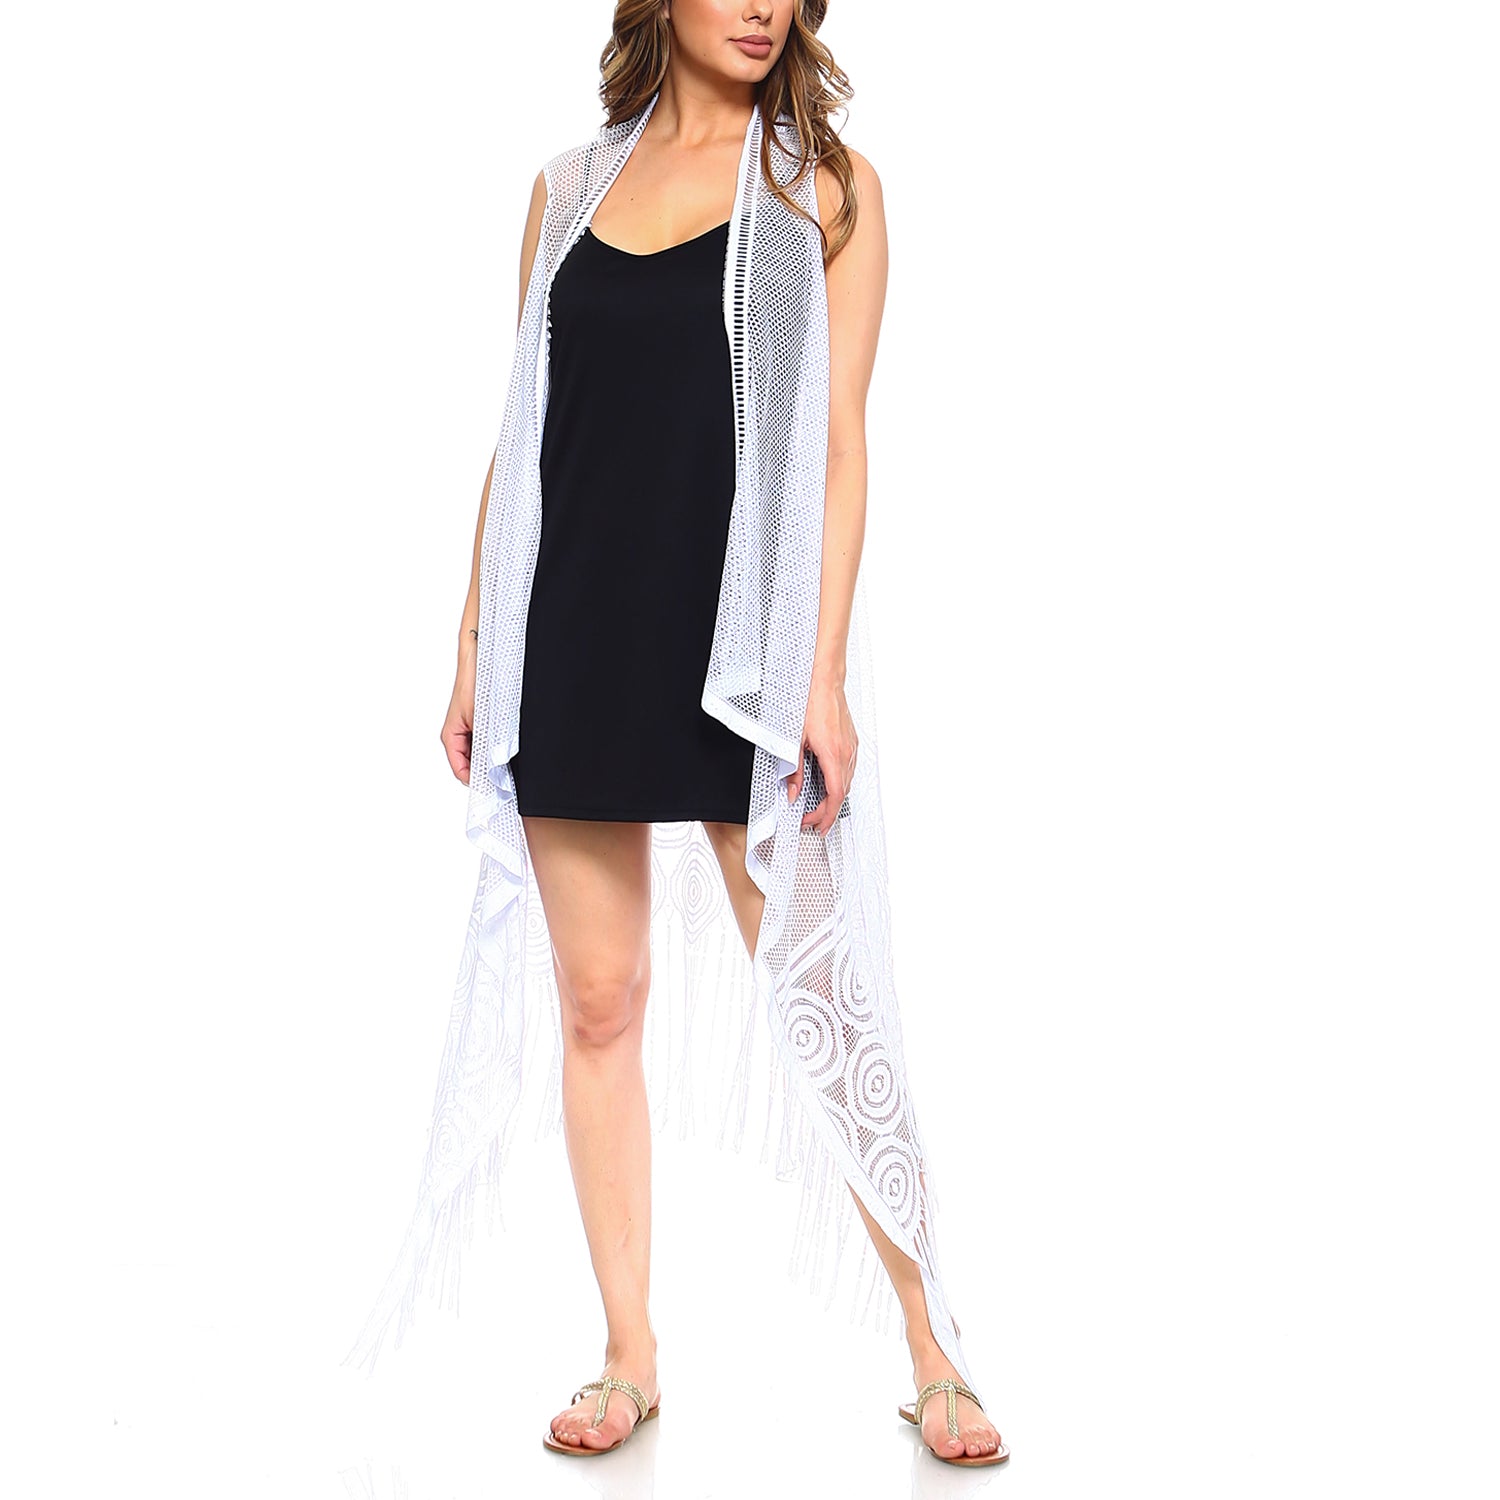 Fashionazzle Women's Casual Sleeveless Lace Cardigan Beach Wear Cover-up-Vest